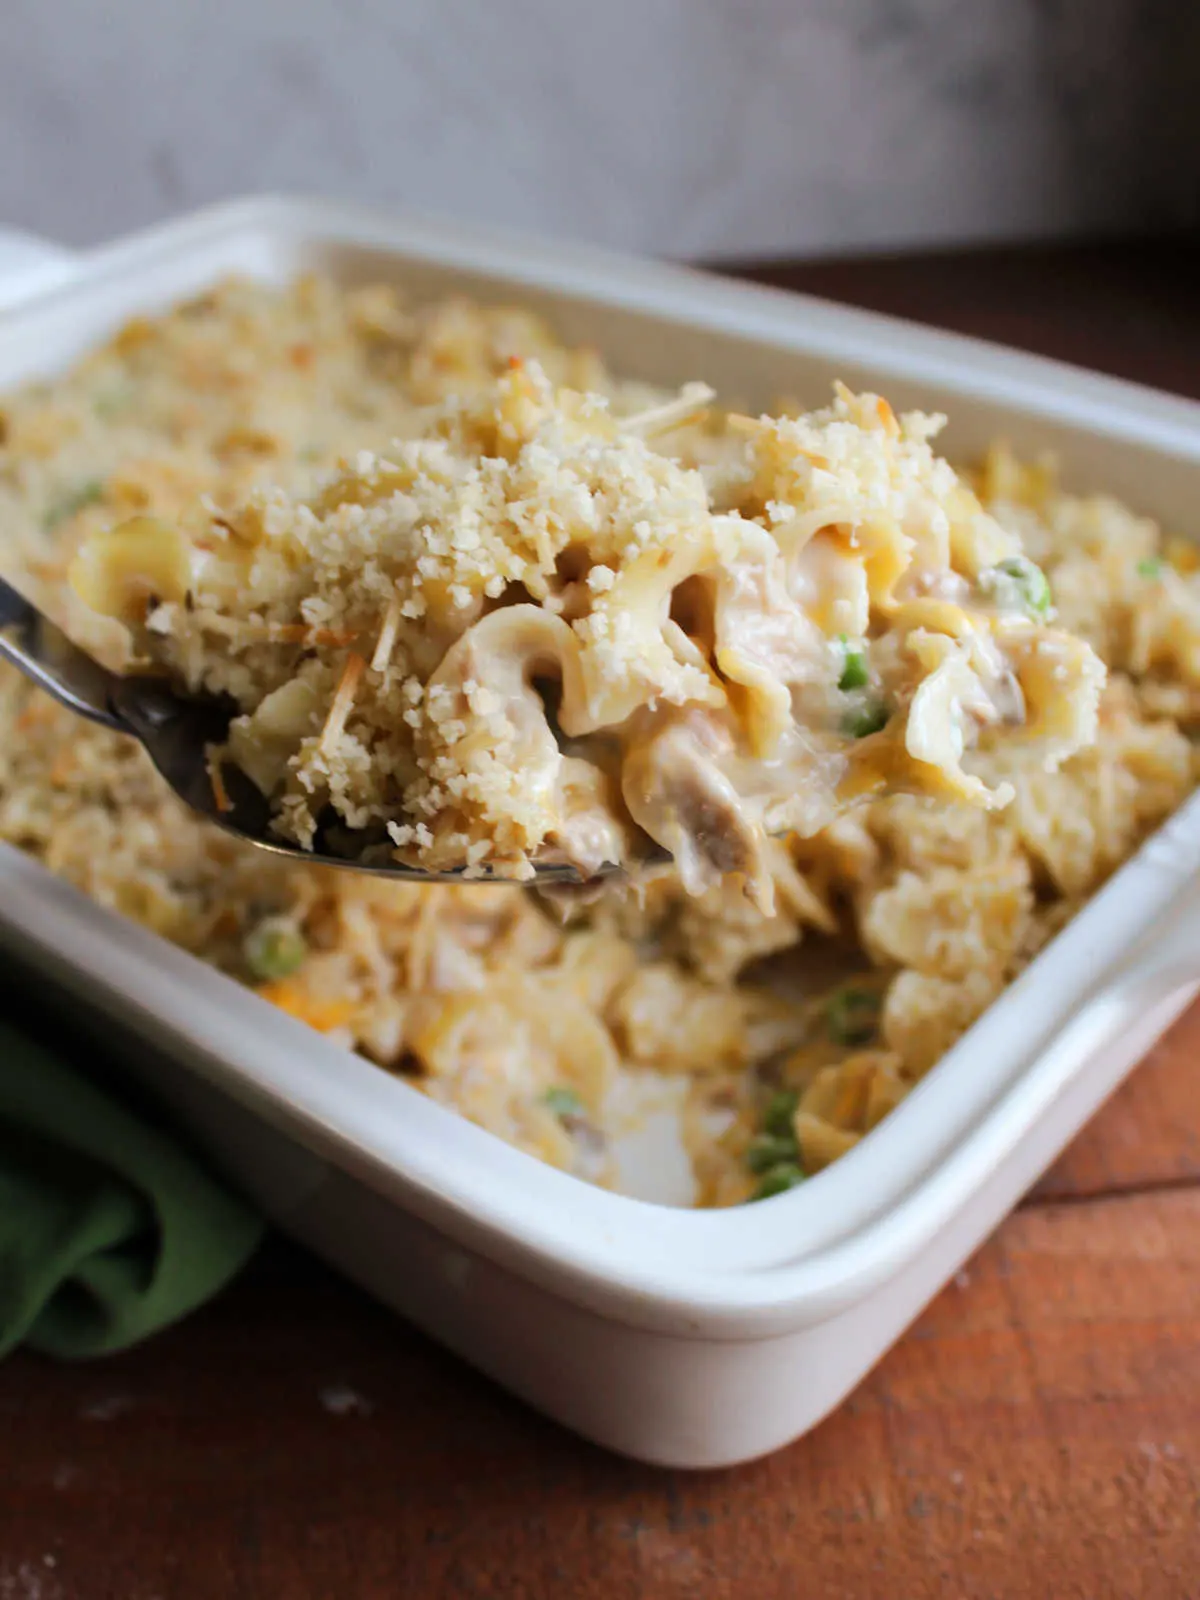 Large serving spoon lifting scoop of tuna noodle casserole out of the pan.